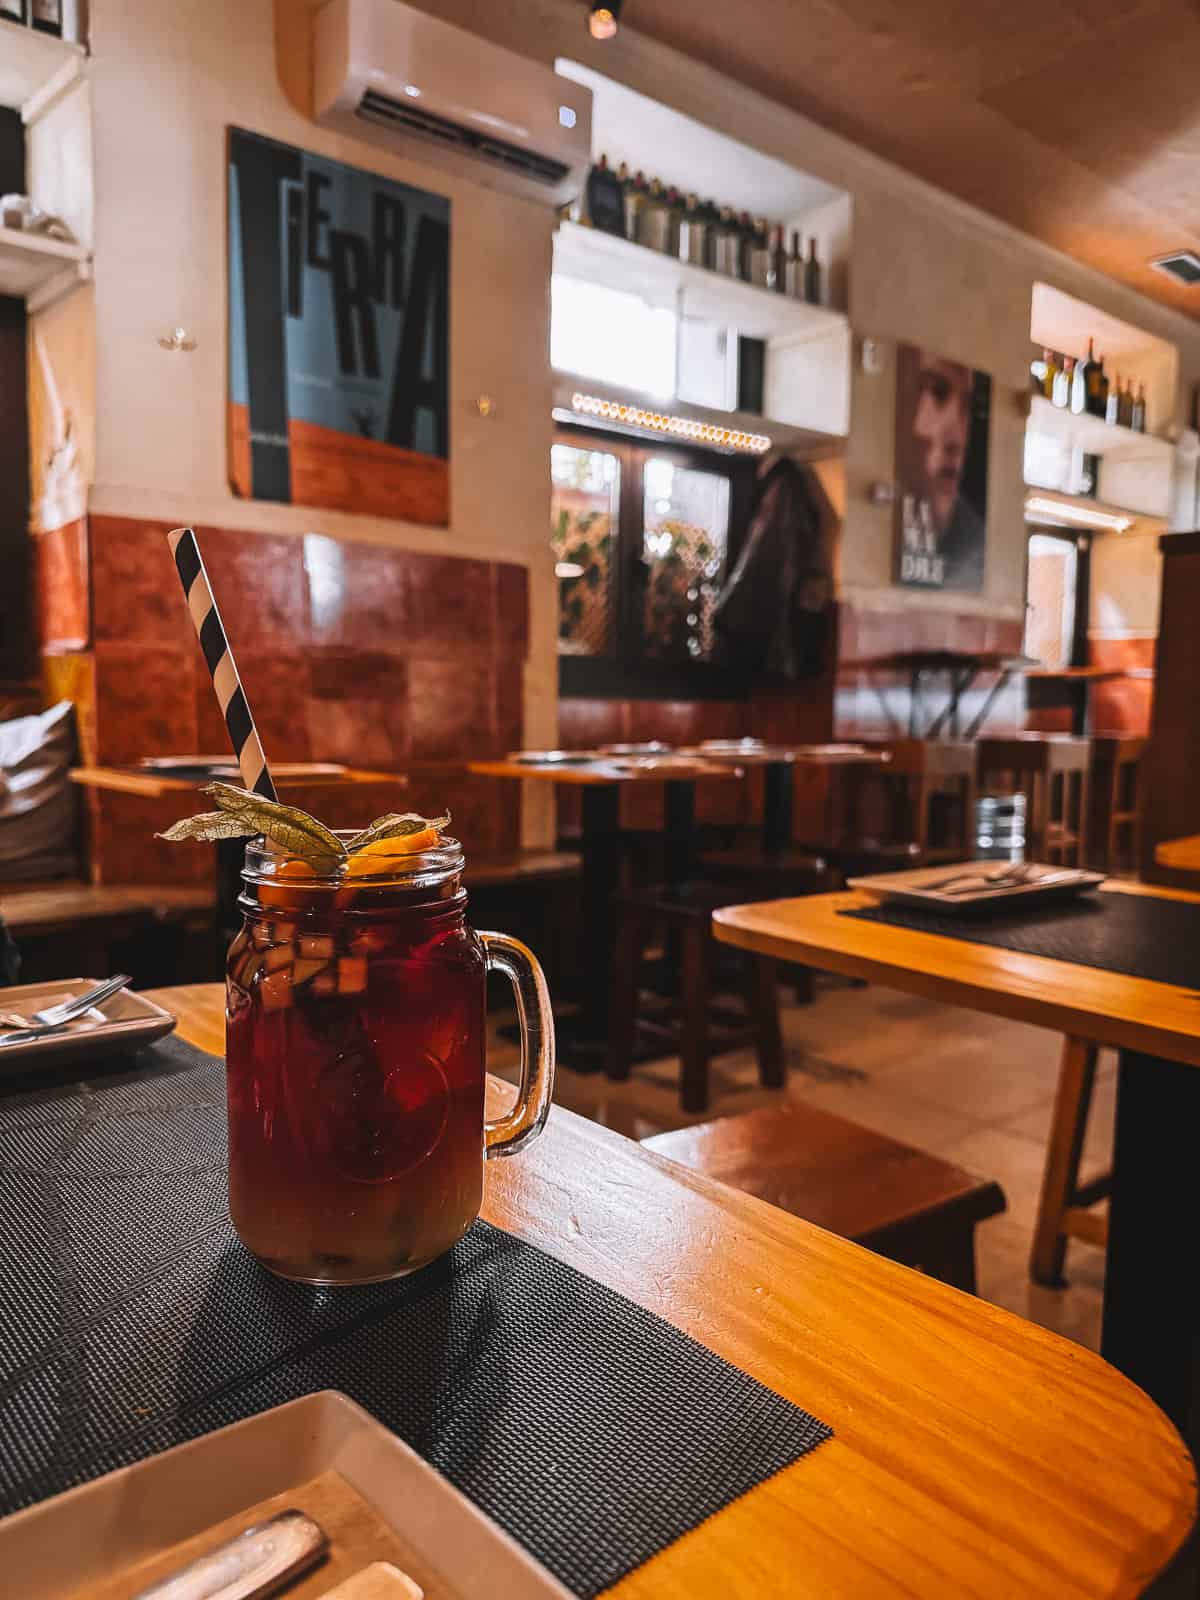 A refreshing sangria served in a mason jar with a striped straw, garnished with a slice of orange and lemon, placed on a wooden table inside the rustic 'Taberna El Sur'